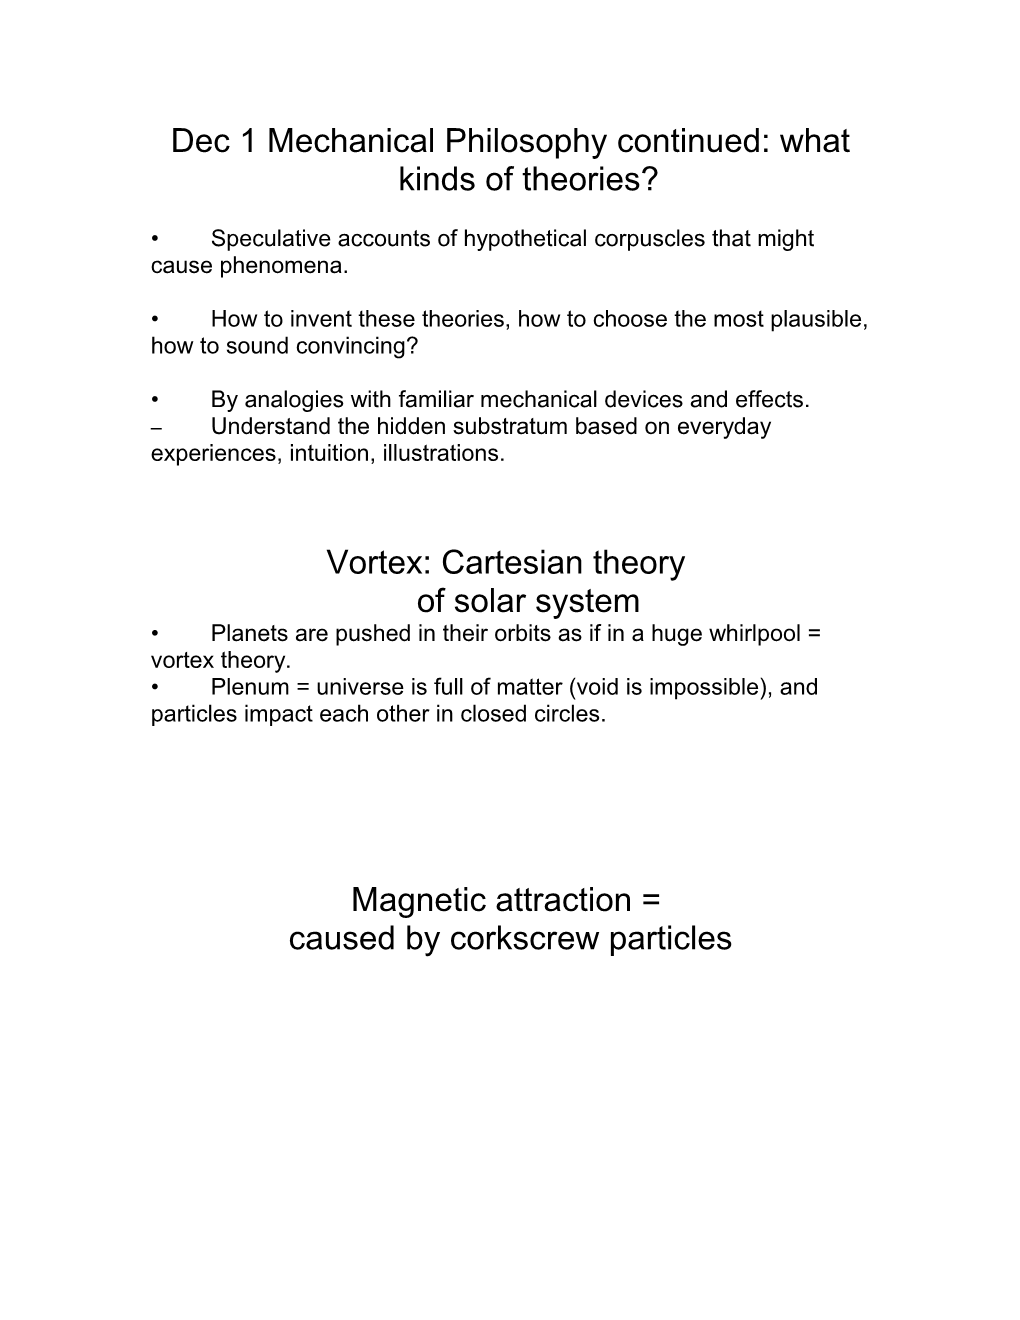 Dec 1 Mechanical Philosophy Continued: What Kinds of Theories